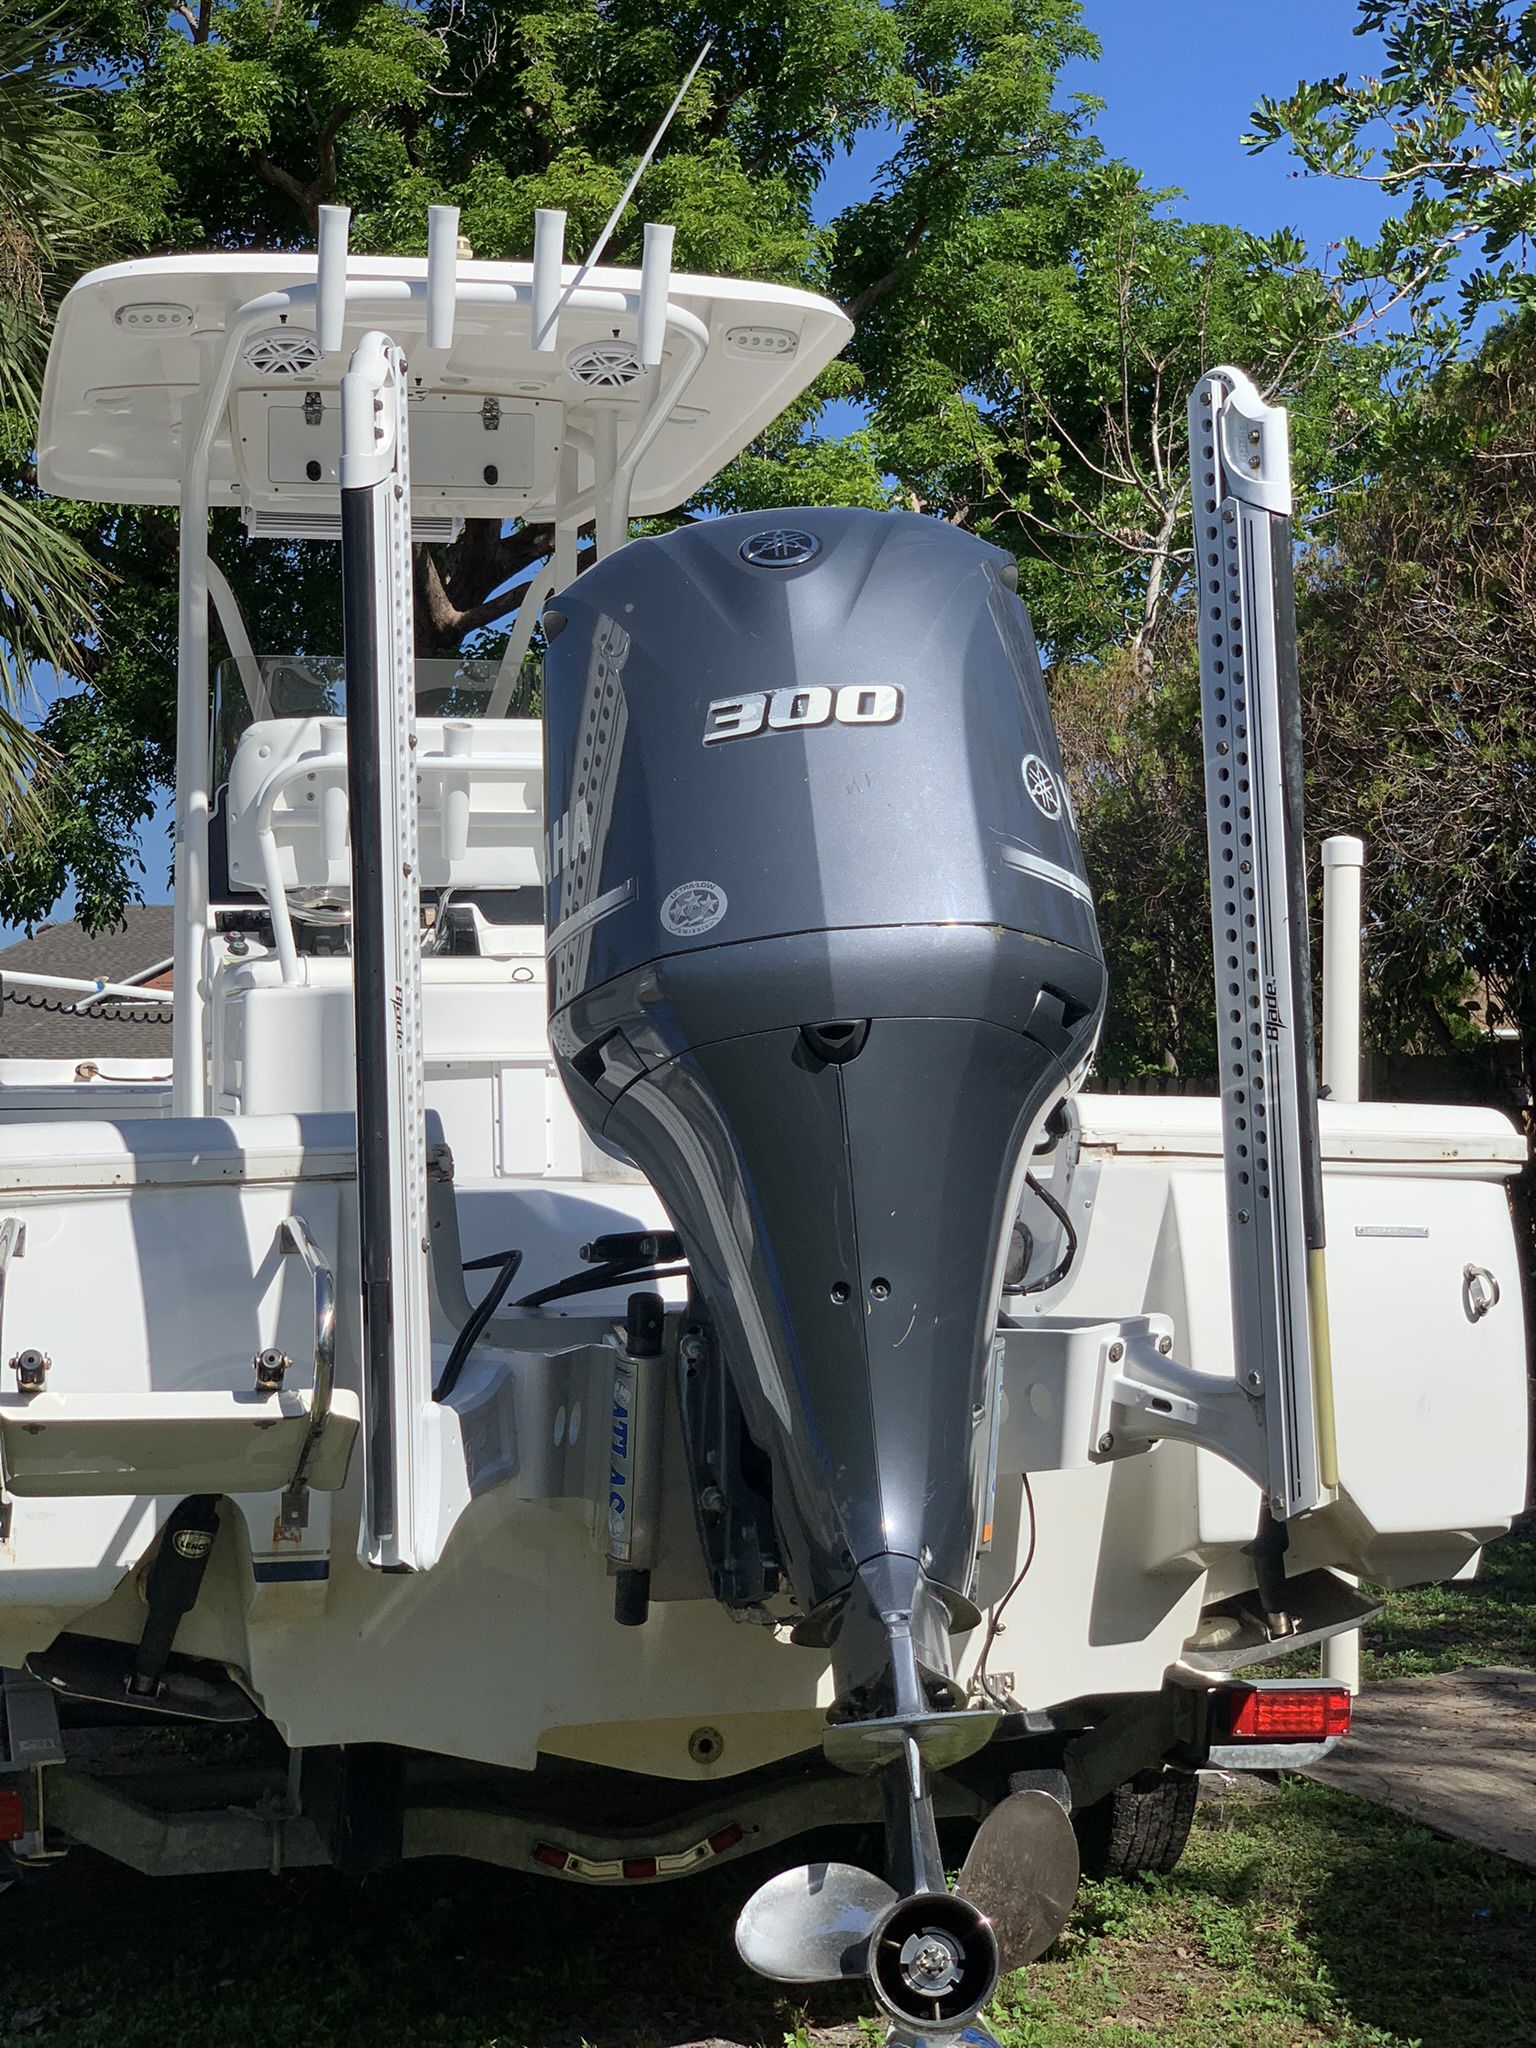 STRICTLY MARINE - Outboards, Rigging, Electrical